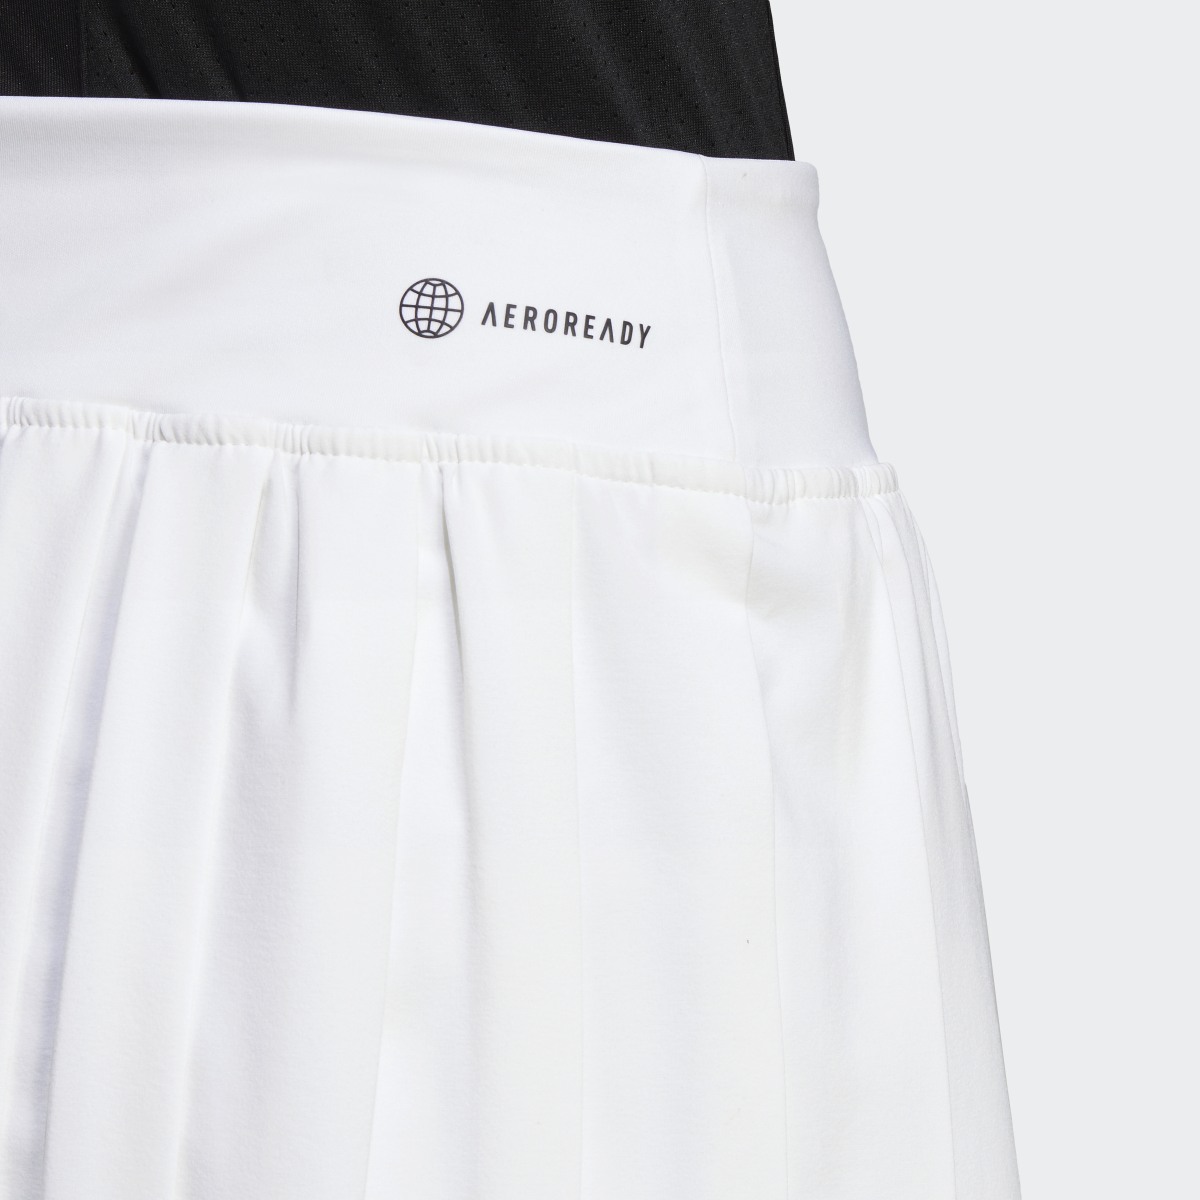 Adidas Clubhouse Premium Classic Tennis Pleated Skirt. 6